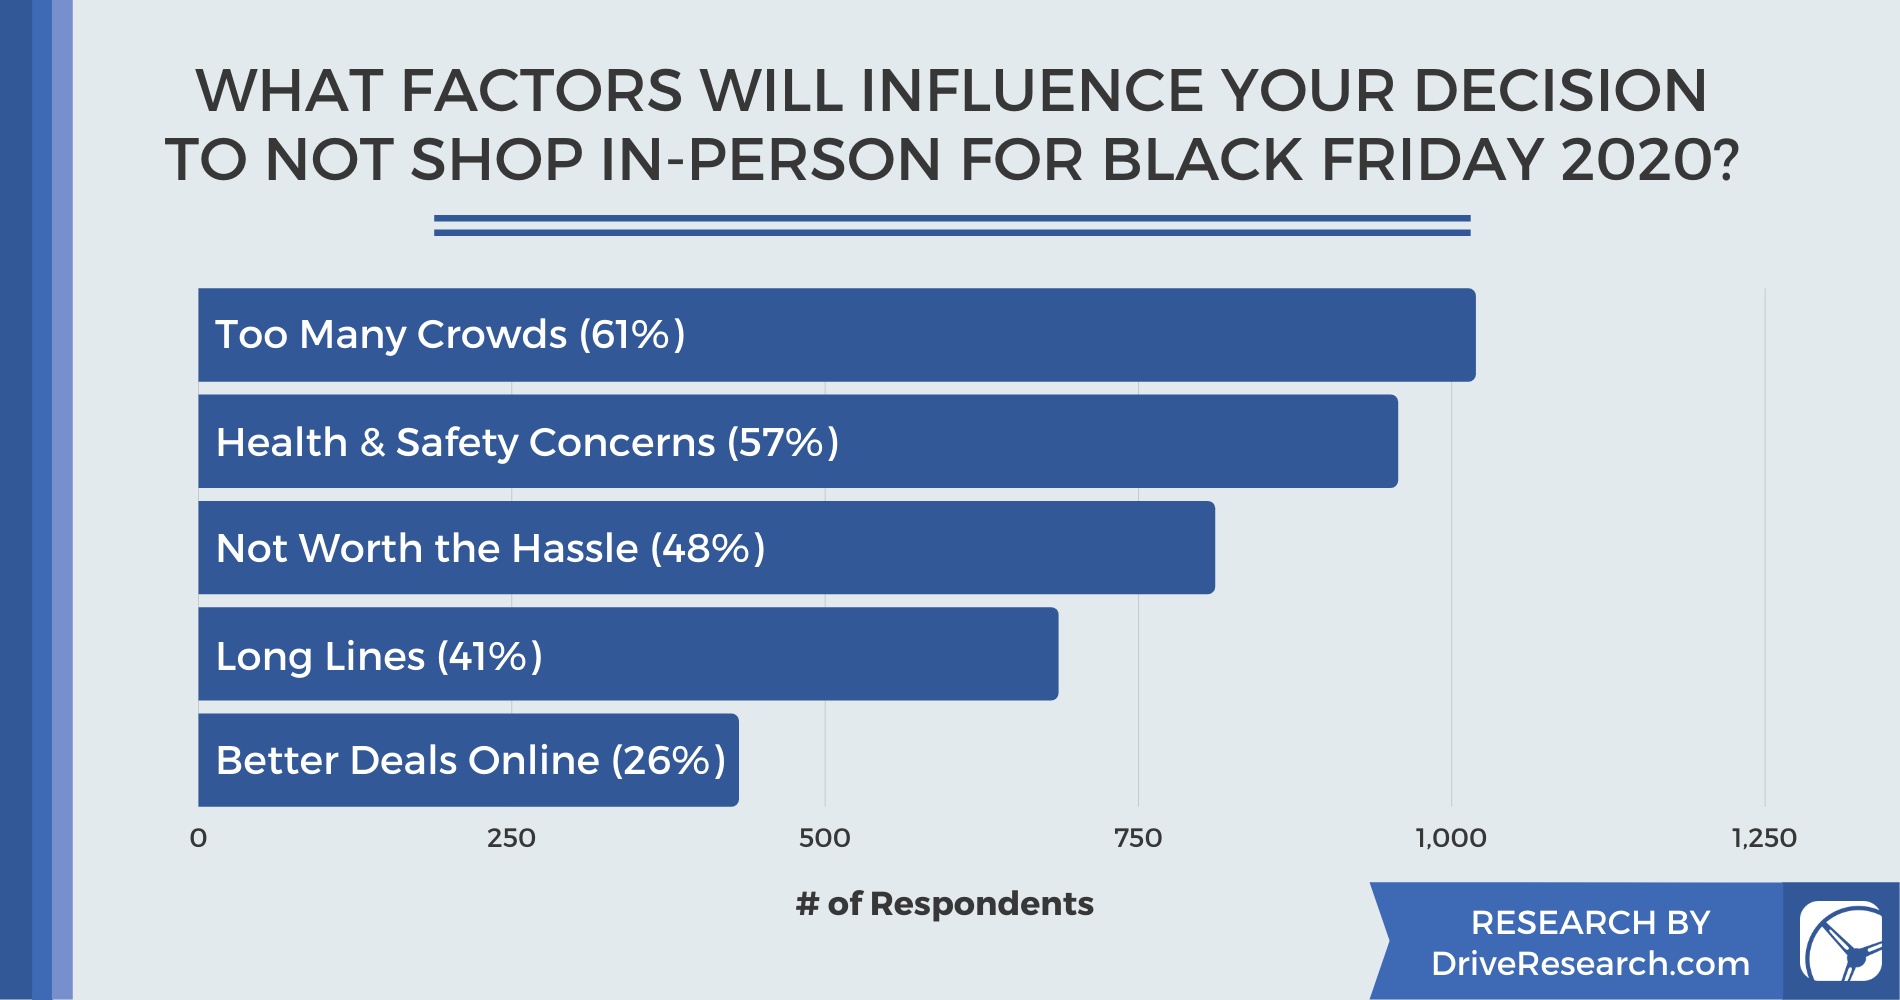 Reasons for Not Going Black Friday Shopping In-Person in 2020